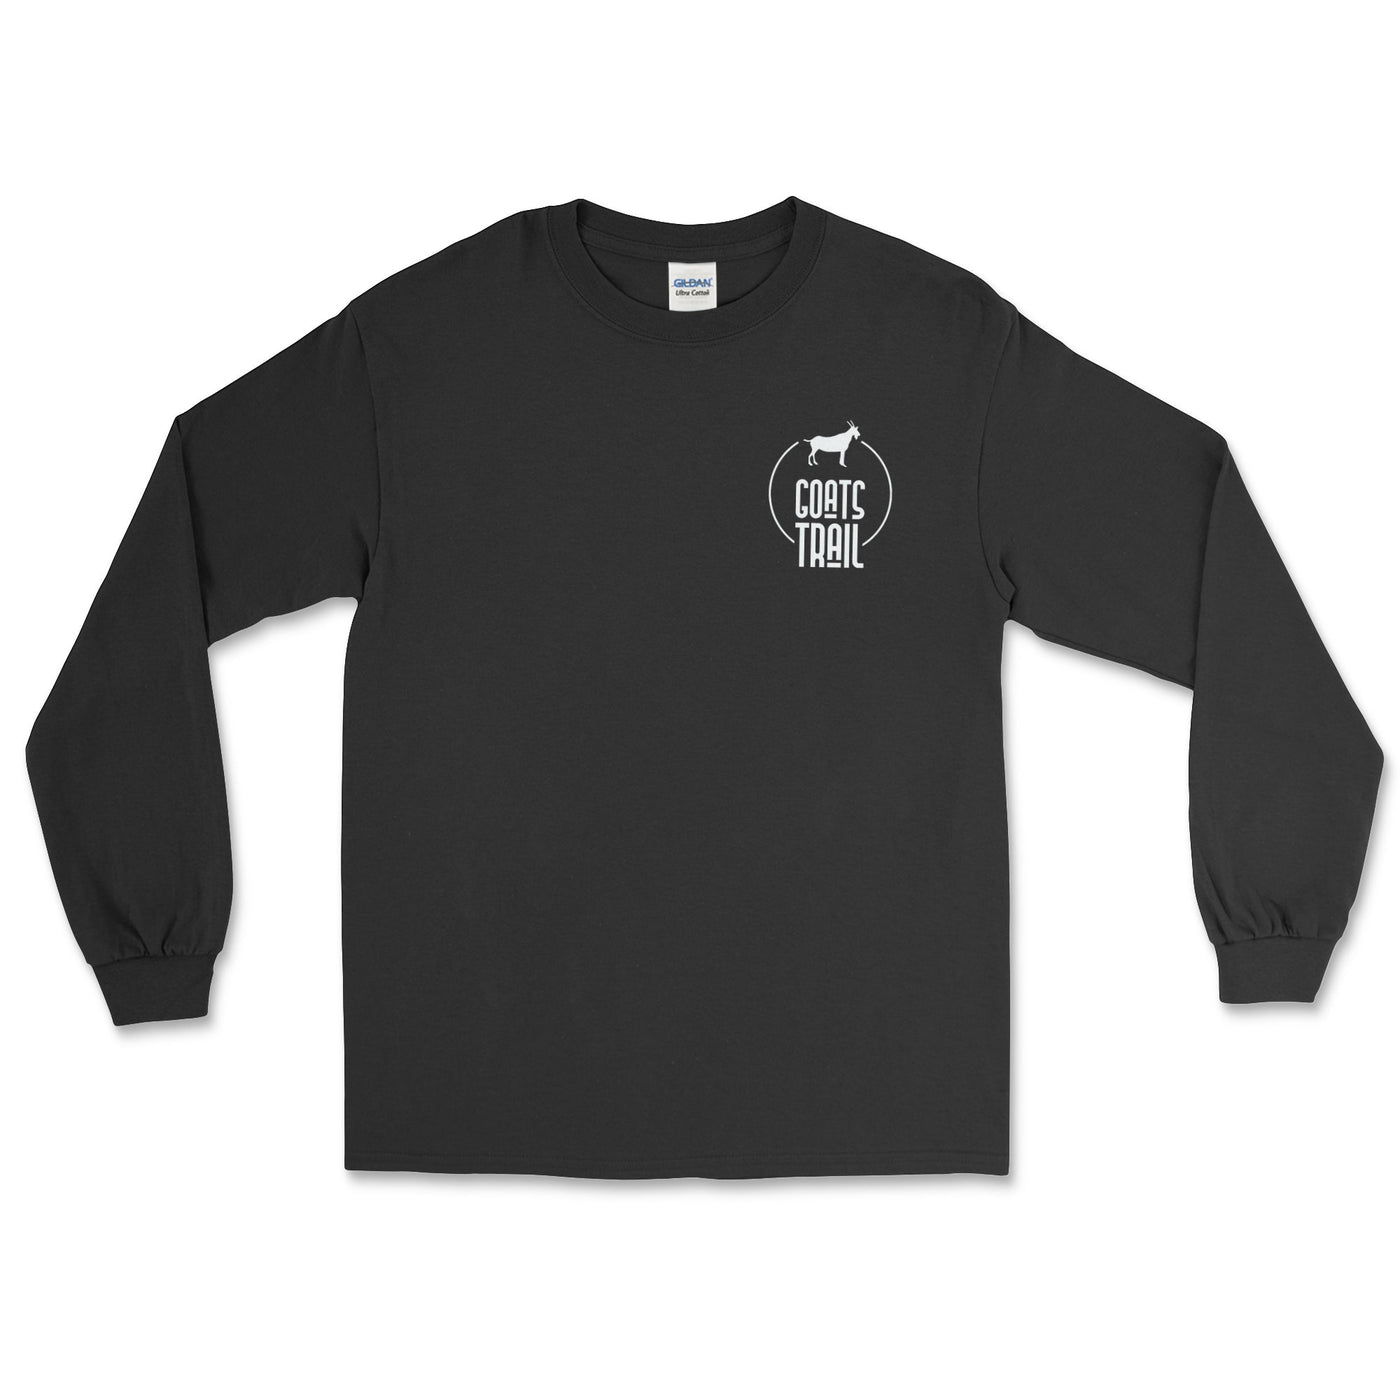 Good Vibes Offroad 4x4 Longsleeve Tee - Goats Trail Off-Road Apparel Company